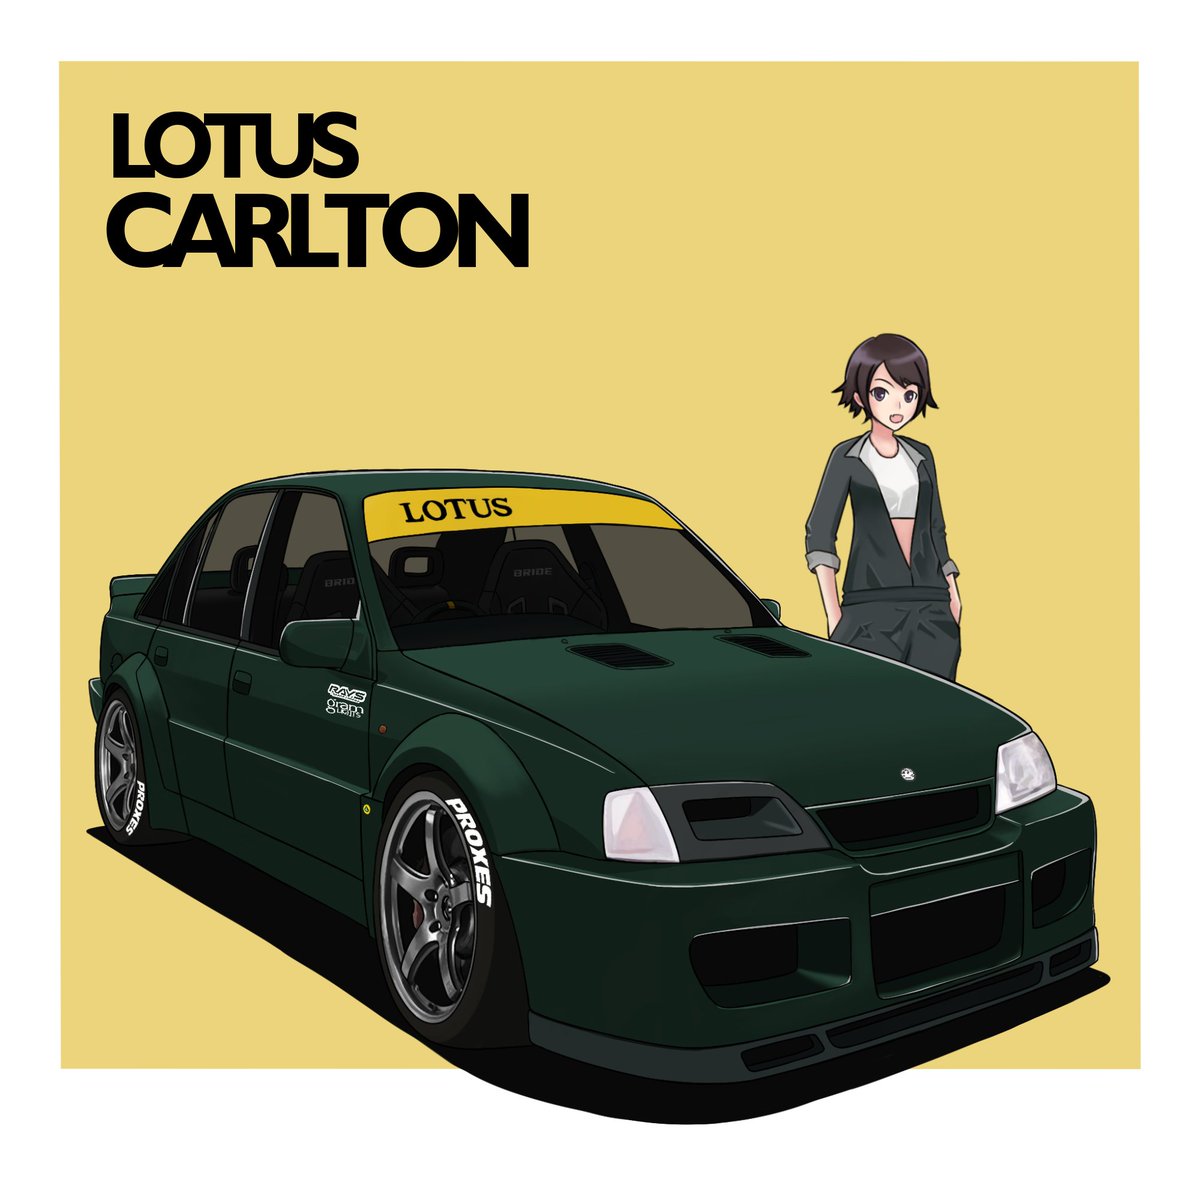 trying to make a drift build-ish lotus carlton 
critique and feedback would be appreciated
.
.
.
.
#carart #illustration #carillustration #drawing #digitaldrawing #cardrawing
#lotus #vauxhall #lotuscarlton #proxes #rays #raysengineering #gramlights #anime #animegirls